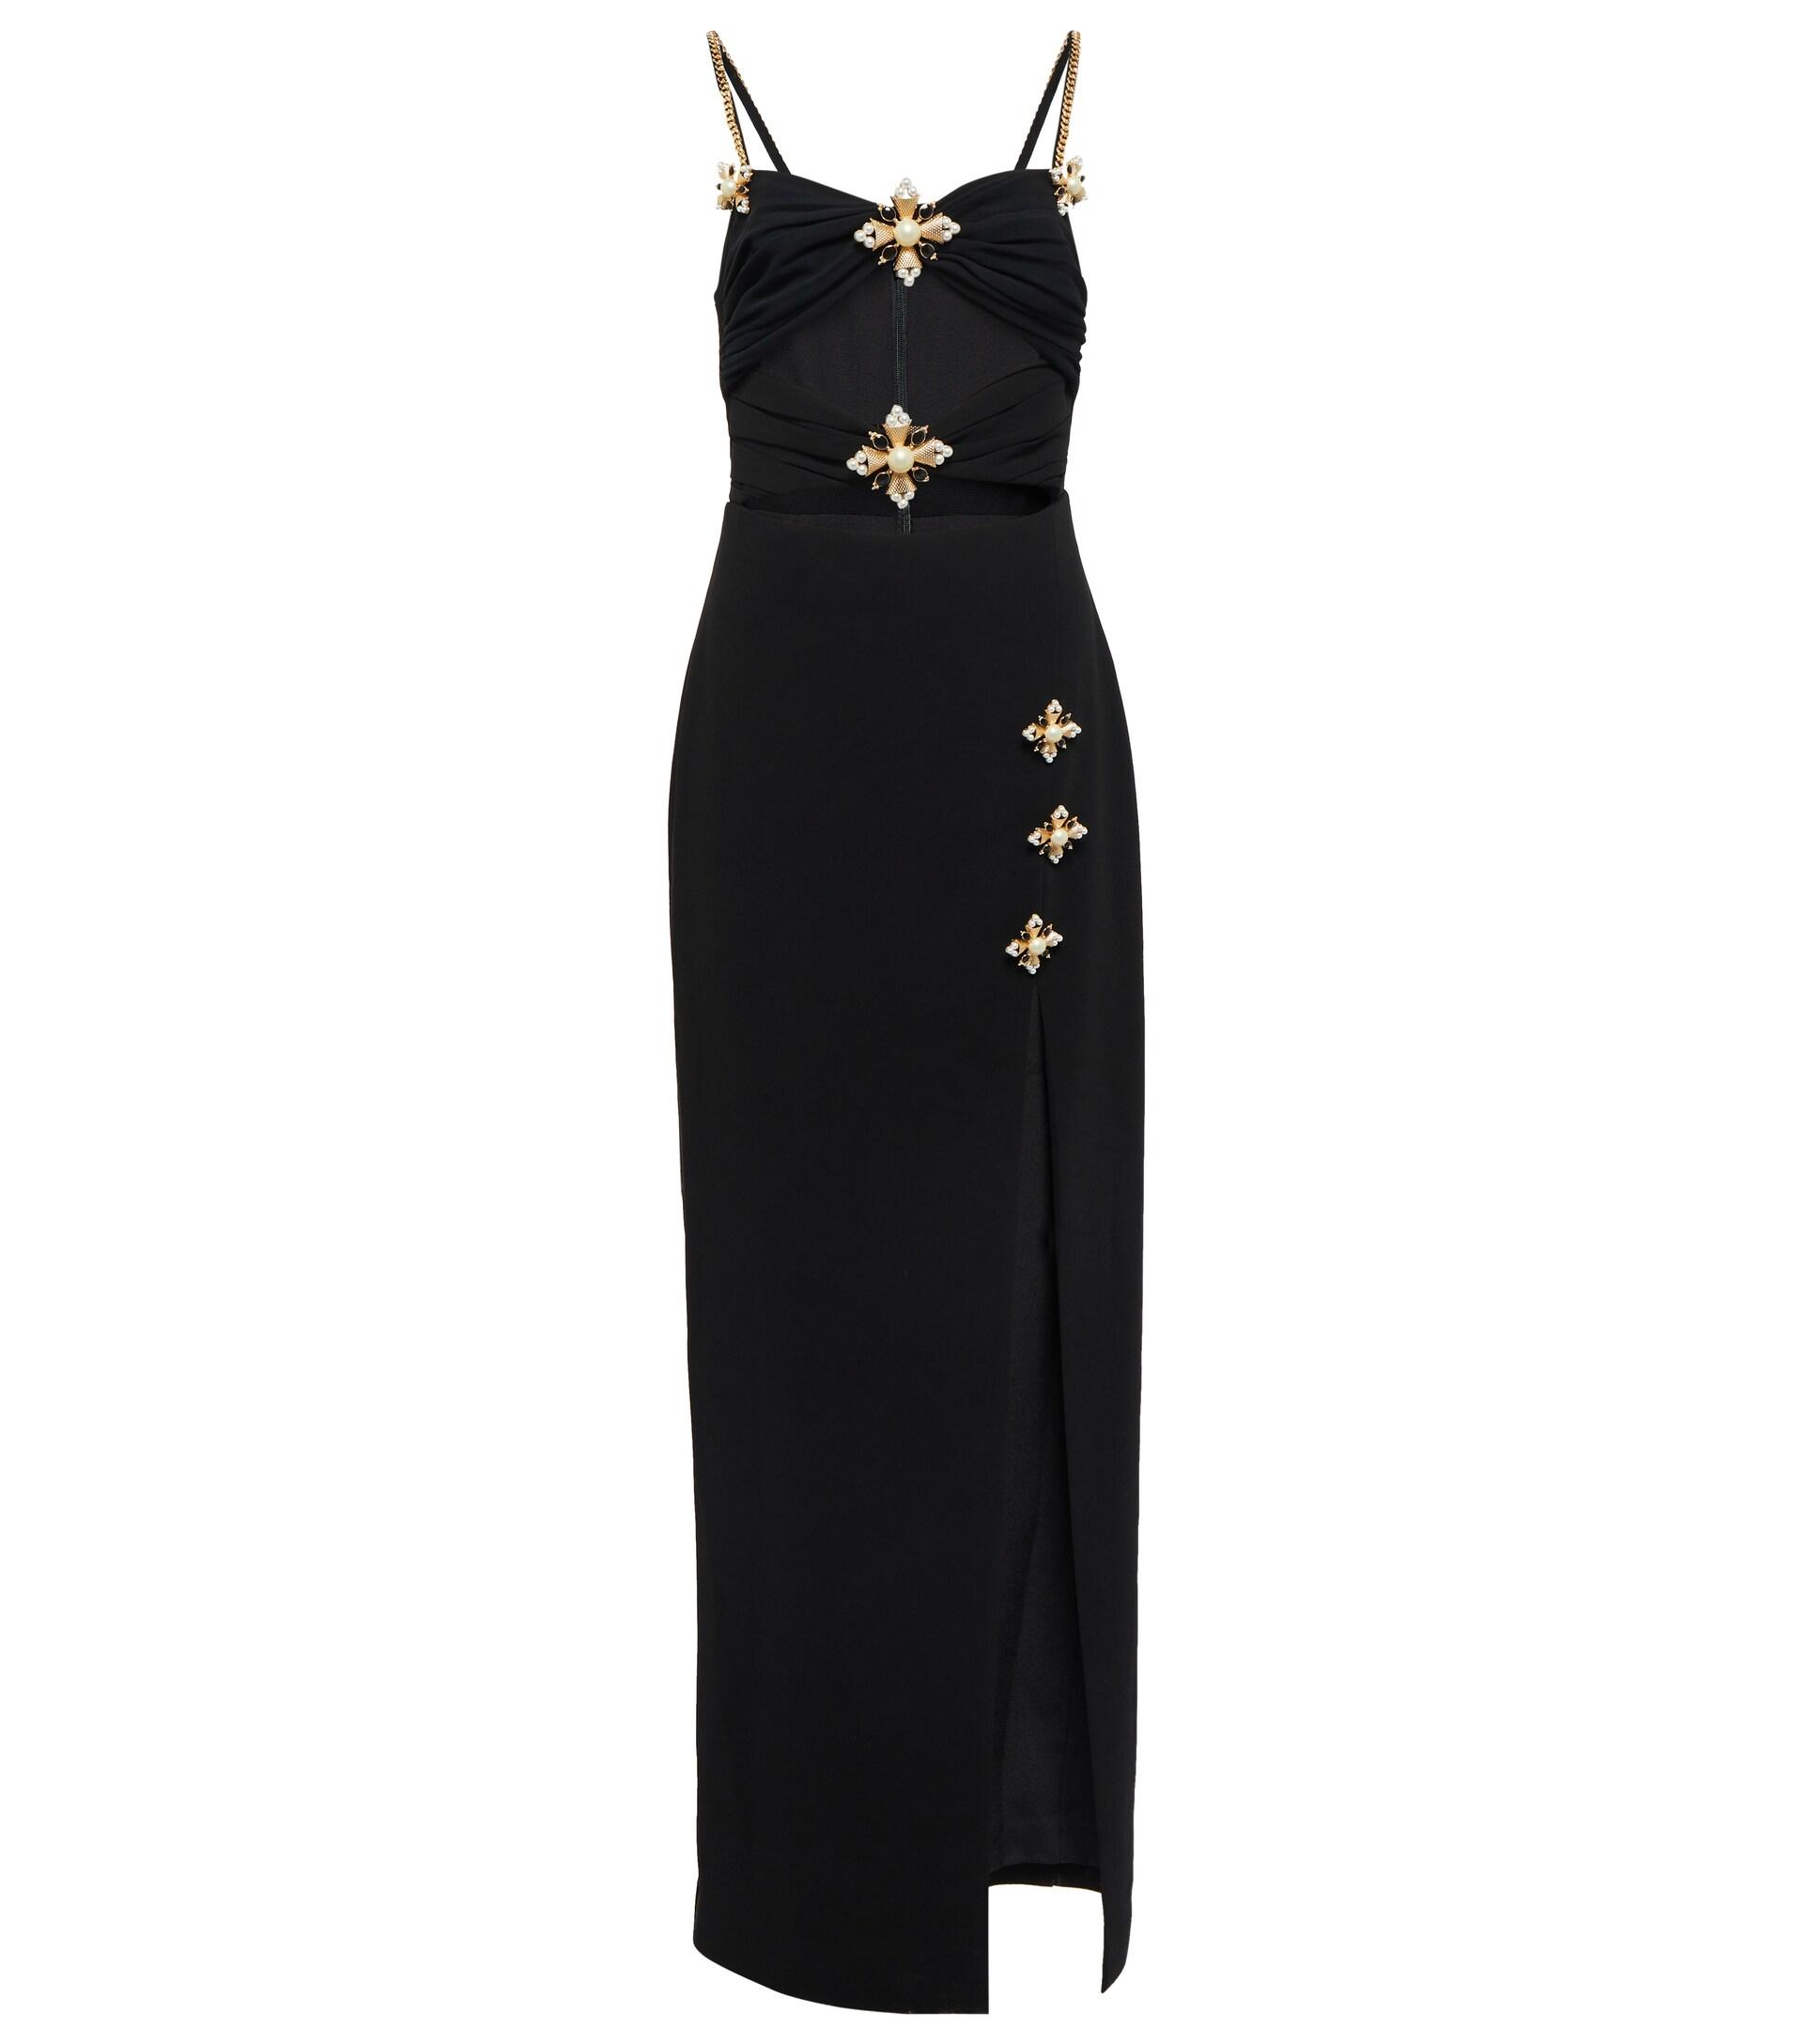 Self-Portrait Synthetic Embellished Cutout Crepe Maxi Dress in Black | Lyst